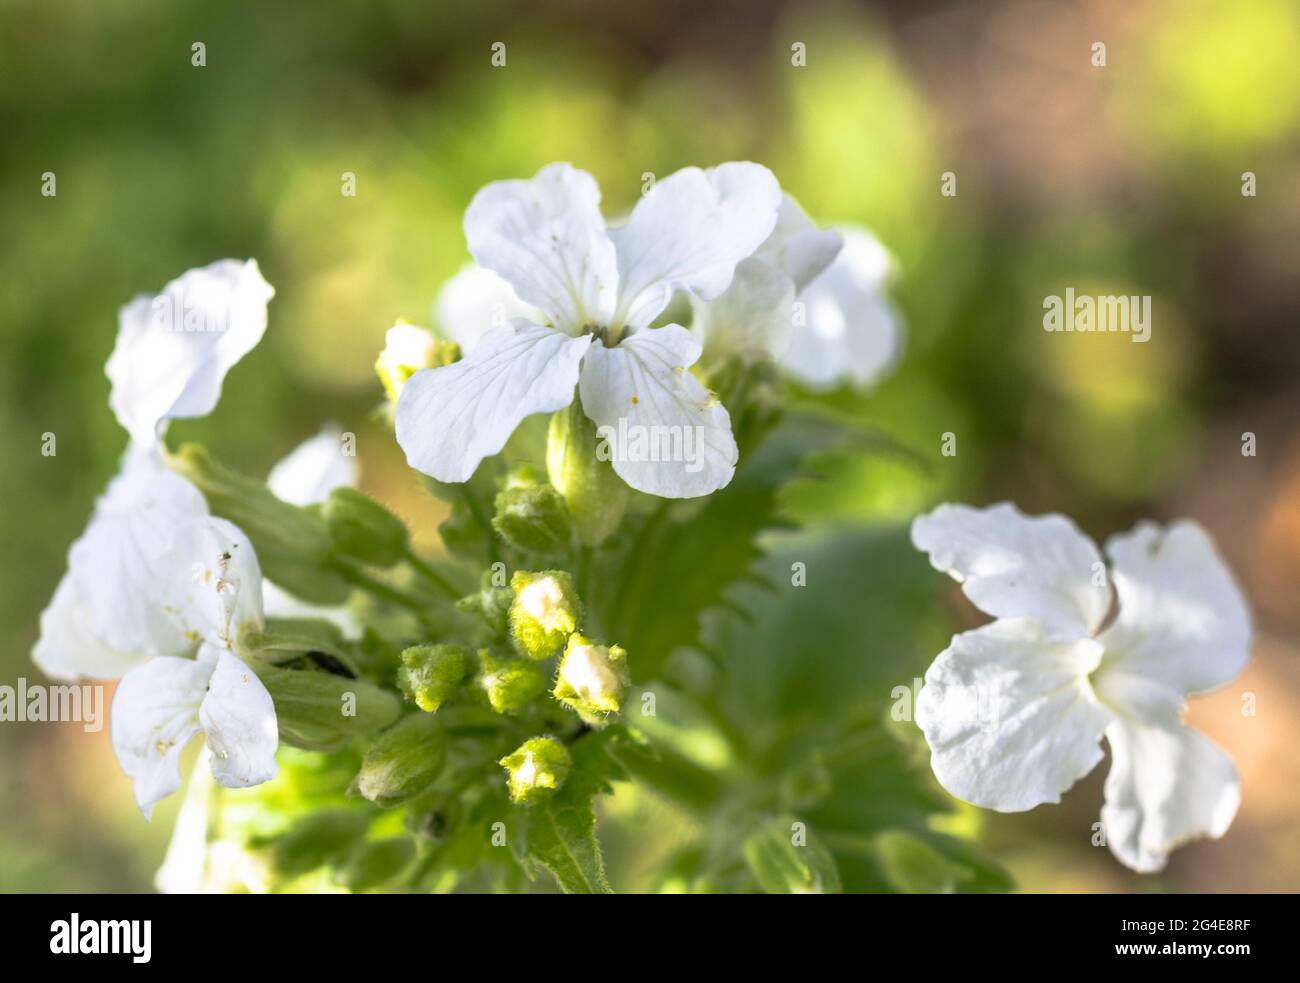 White Honesty (Lunaria annua) flowers in a garden in England, UK, in April. Stock Photo